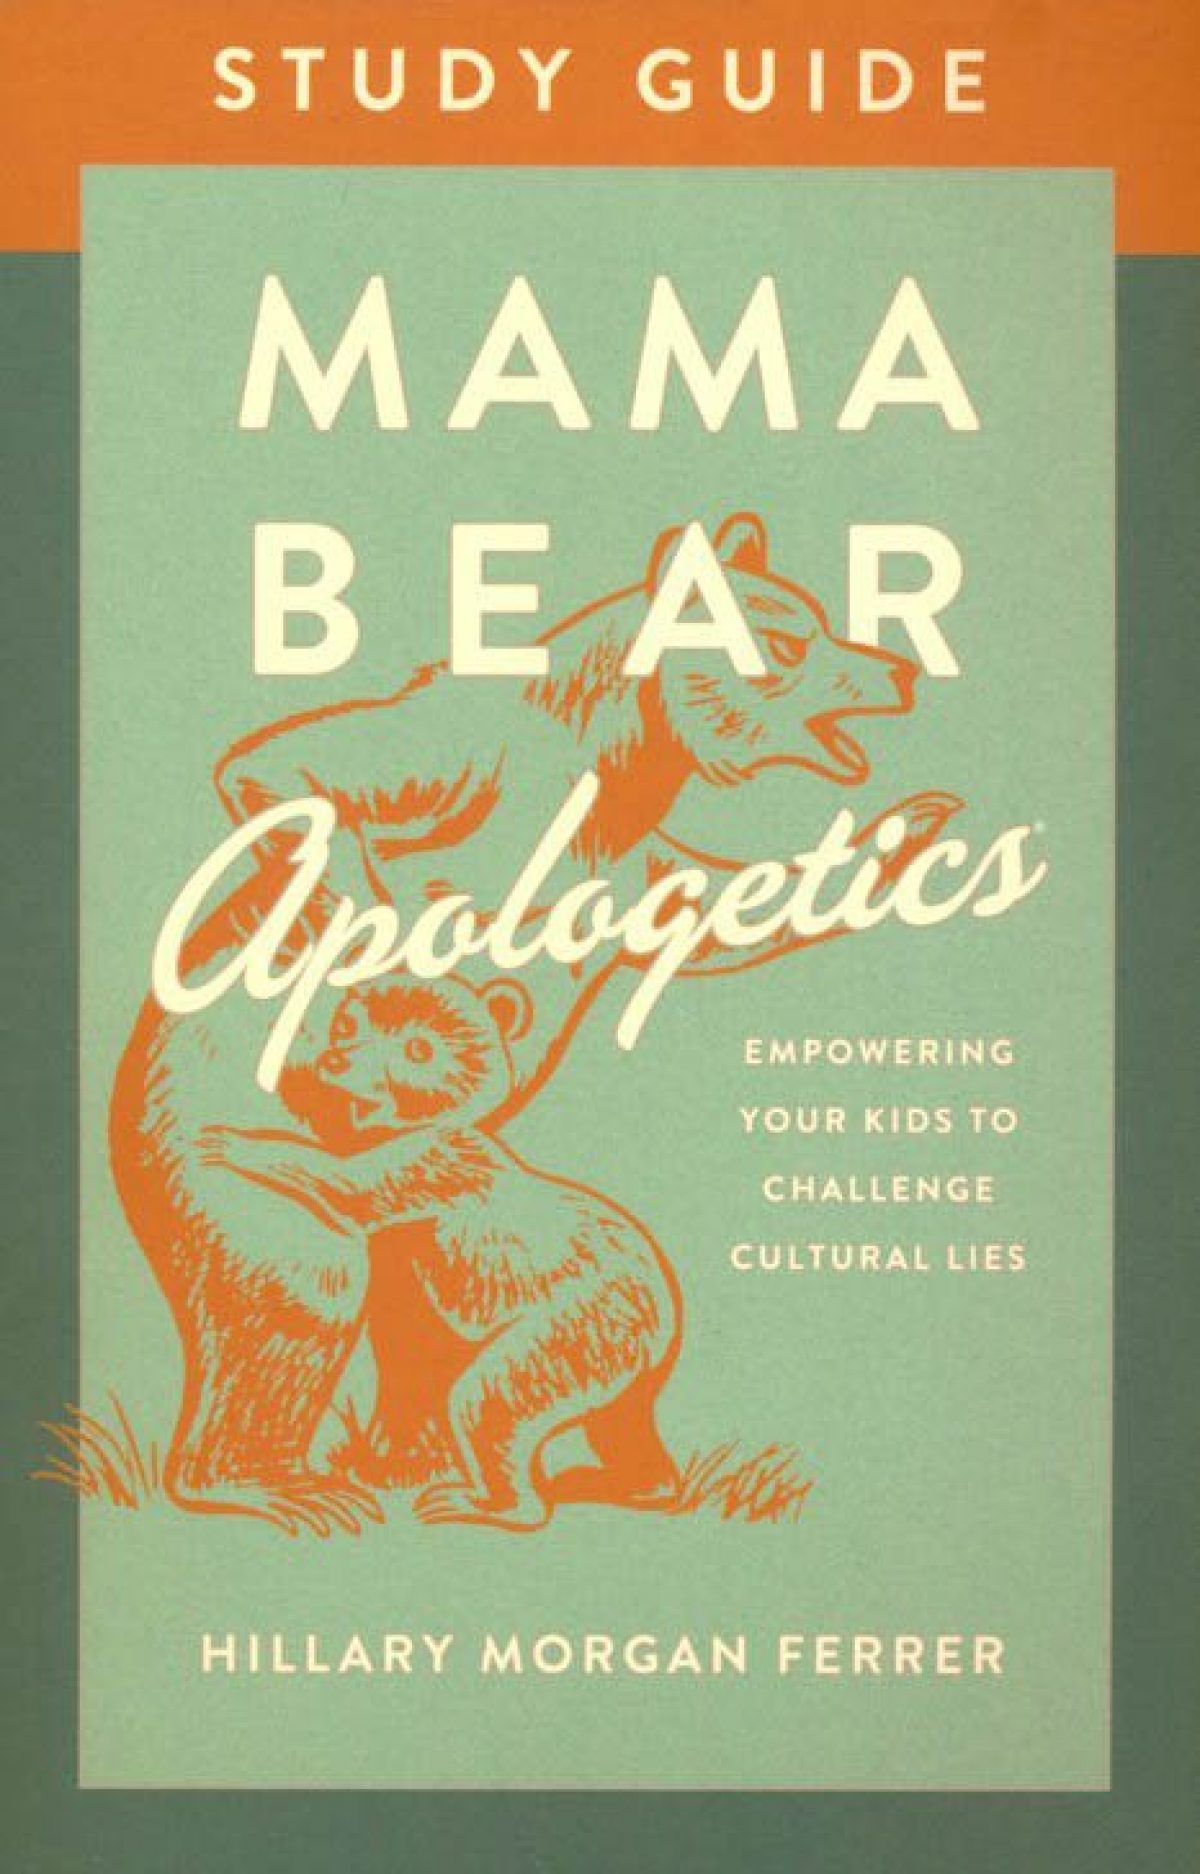 mama bear apologetics study guide empowering your kids to challenge cultural